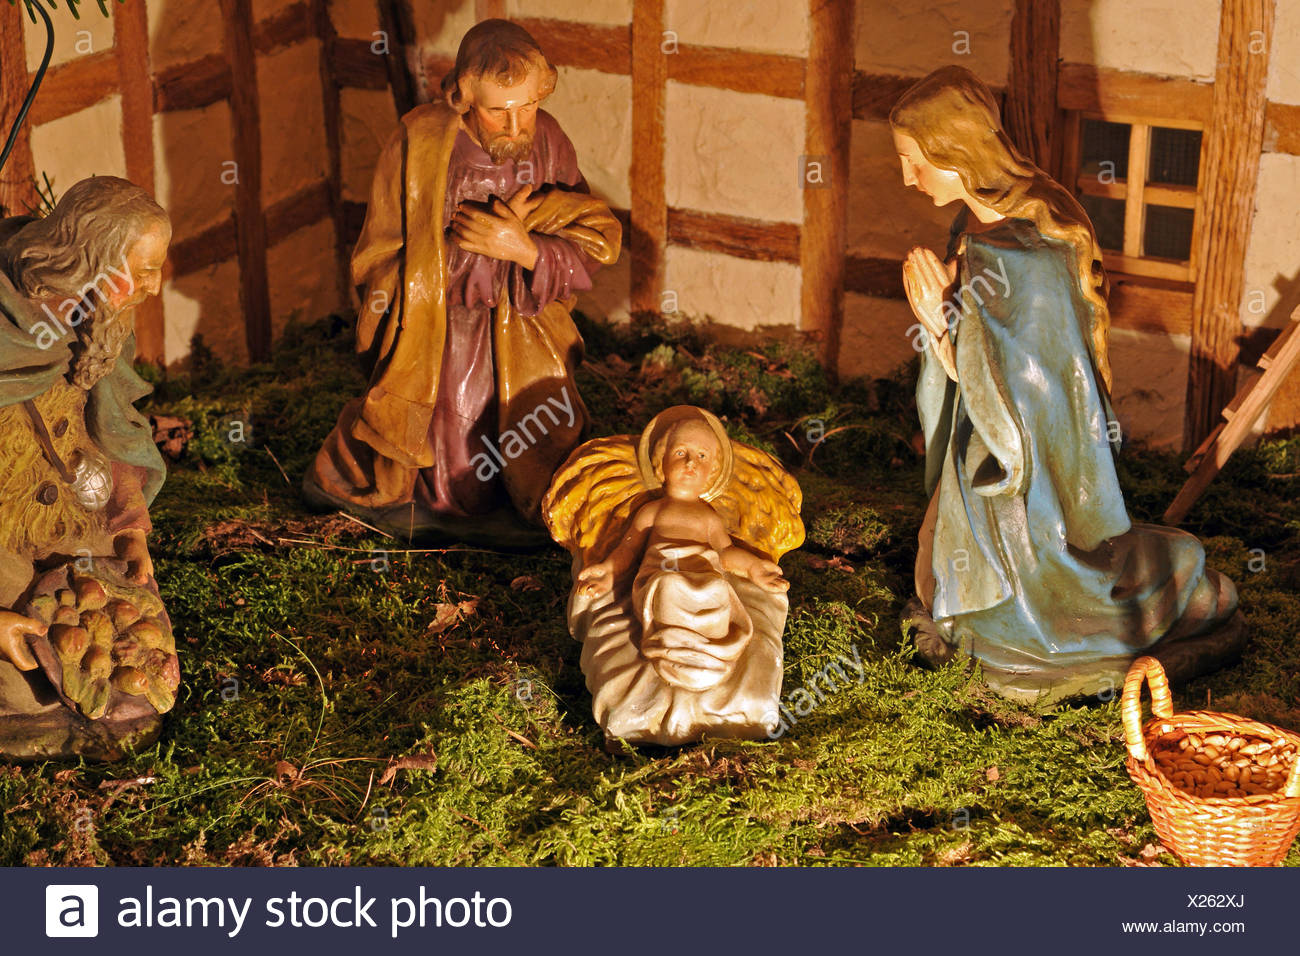 manger stronghold birth childbirth parturition delivery celebrate reveling Stock Image